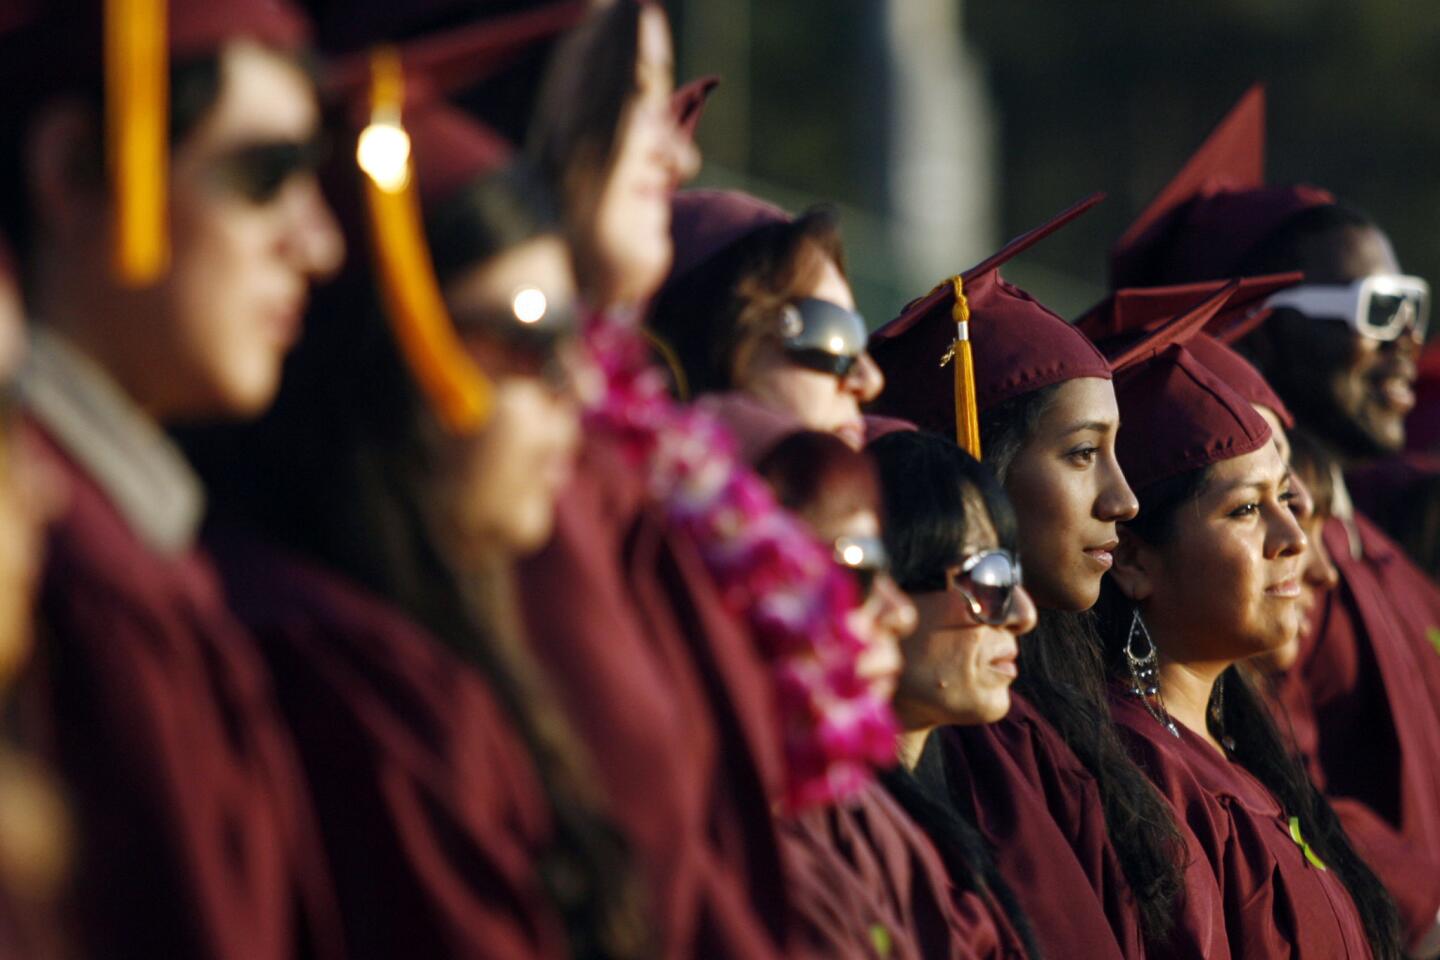 GCC's Rosenda Colmenares, from third right, and other graduates line up as they listen to the Chambers Singers Men perform during GCC's graduation ceremony in Glendale on Friday, June 1, 2012.